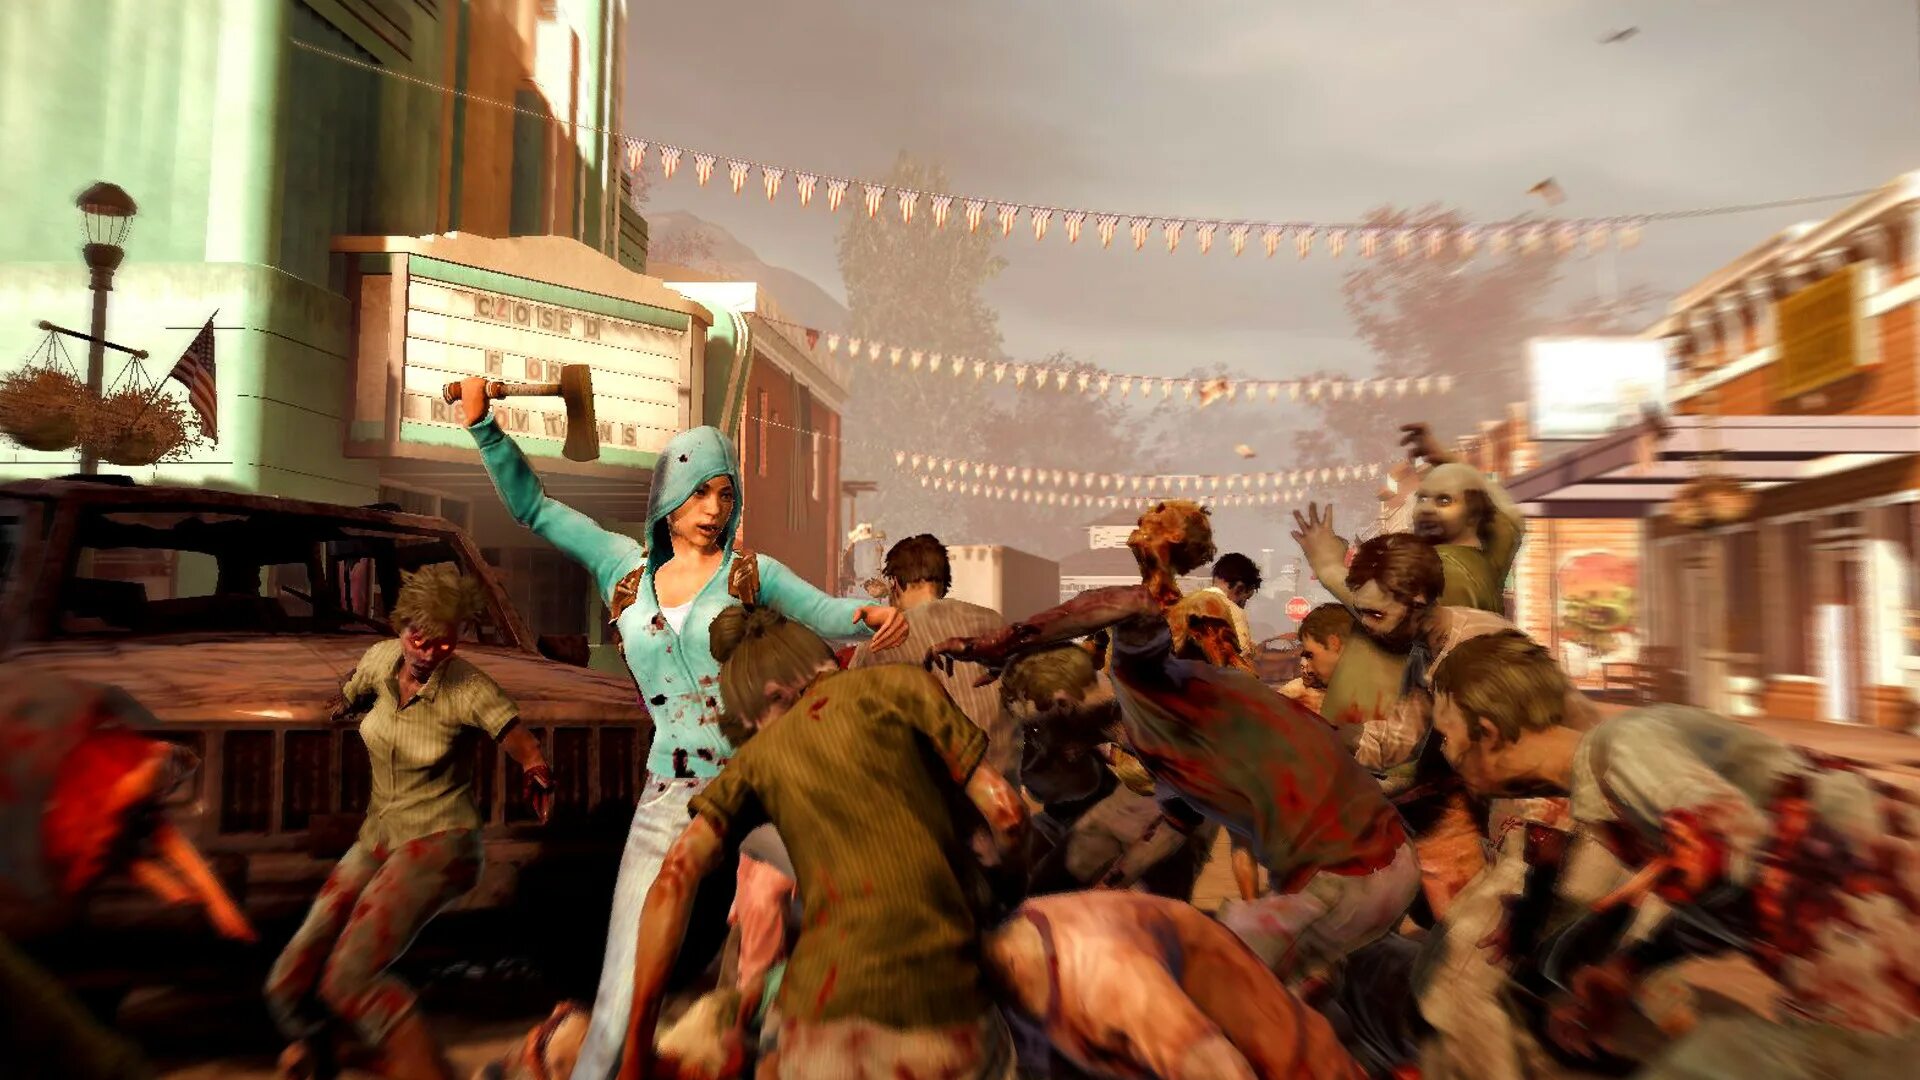 State of Decay yose - Day one Edition. State of Decay: year one Survival Edition. State of decay где